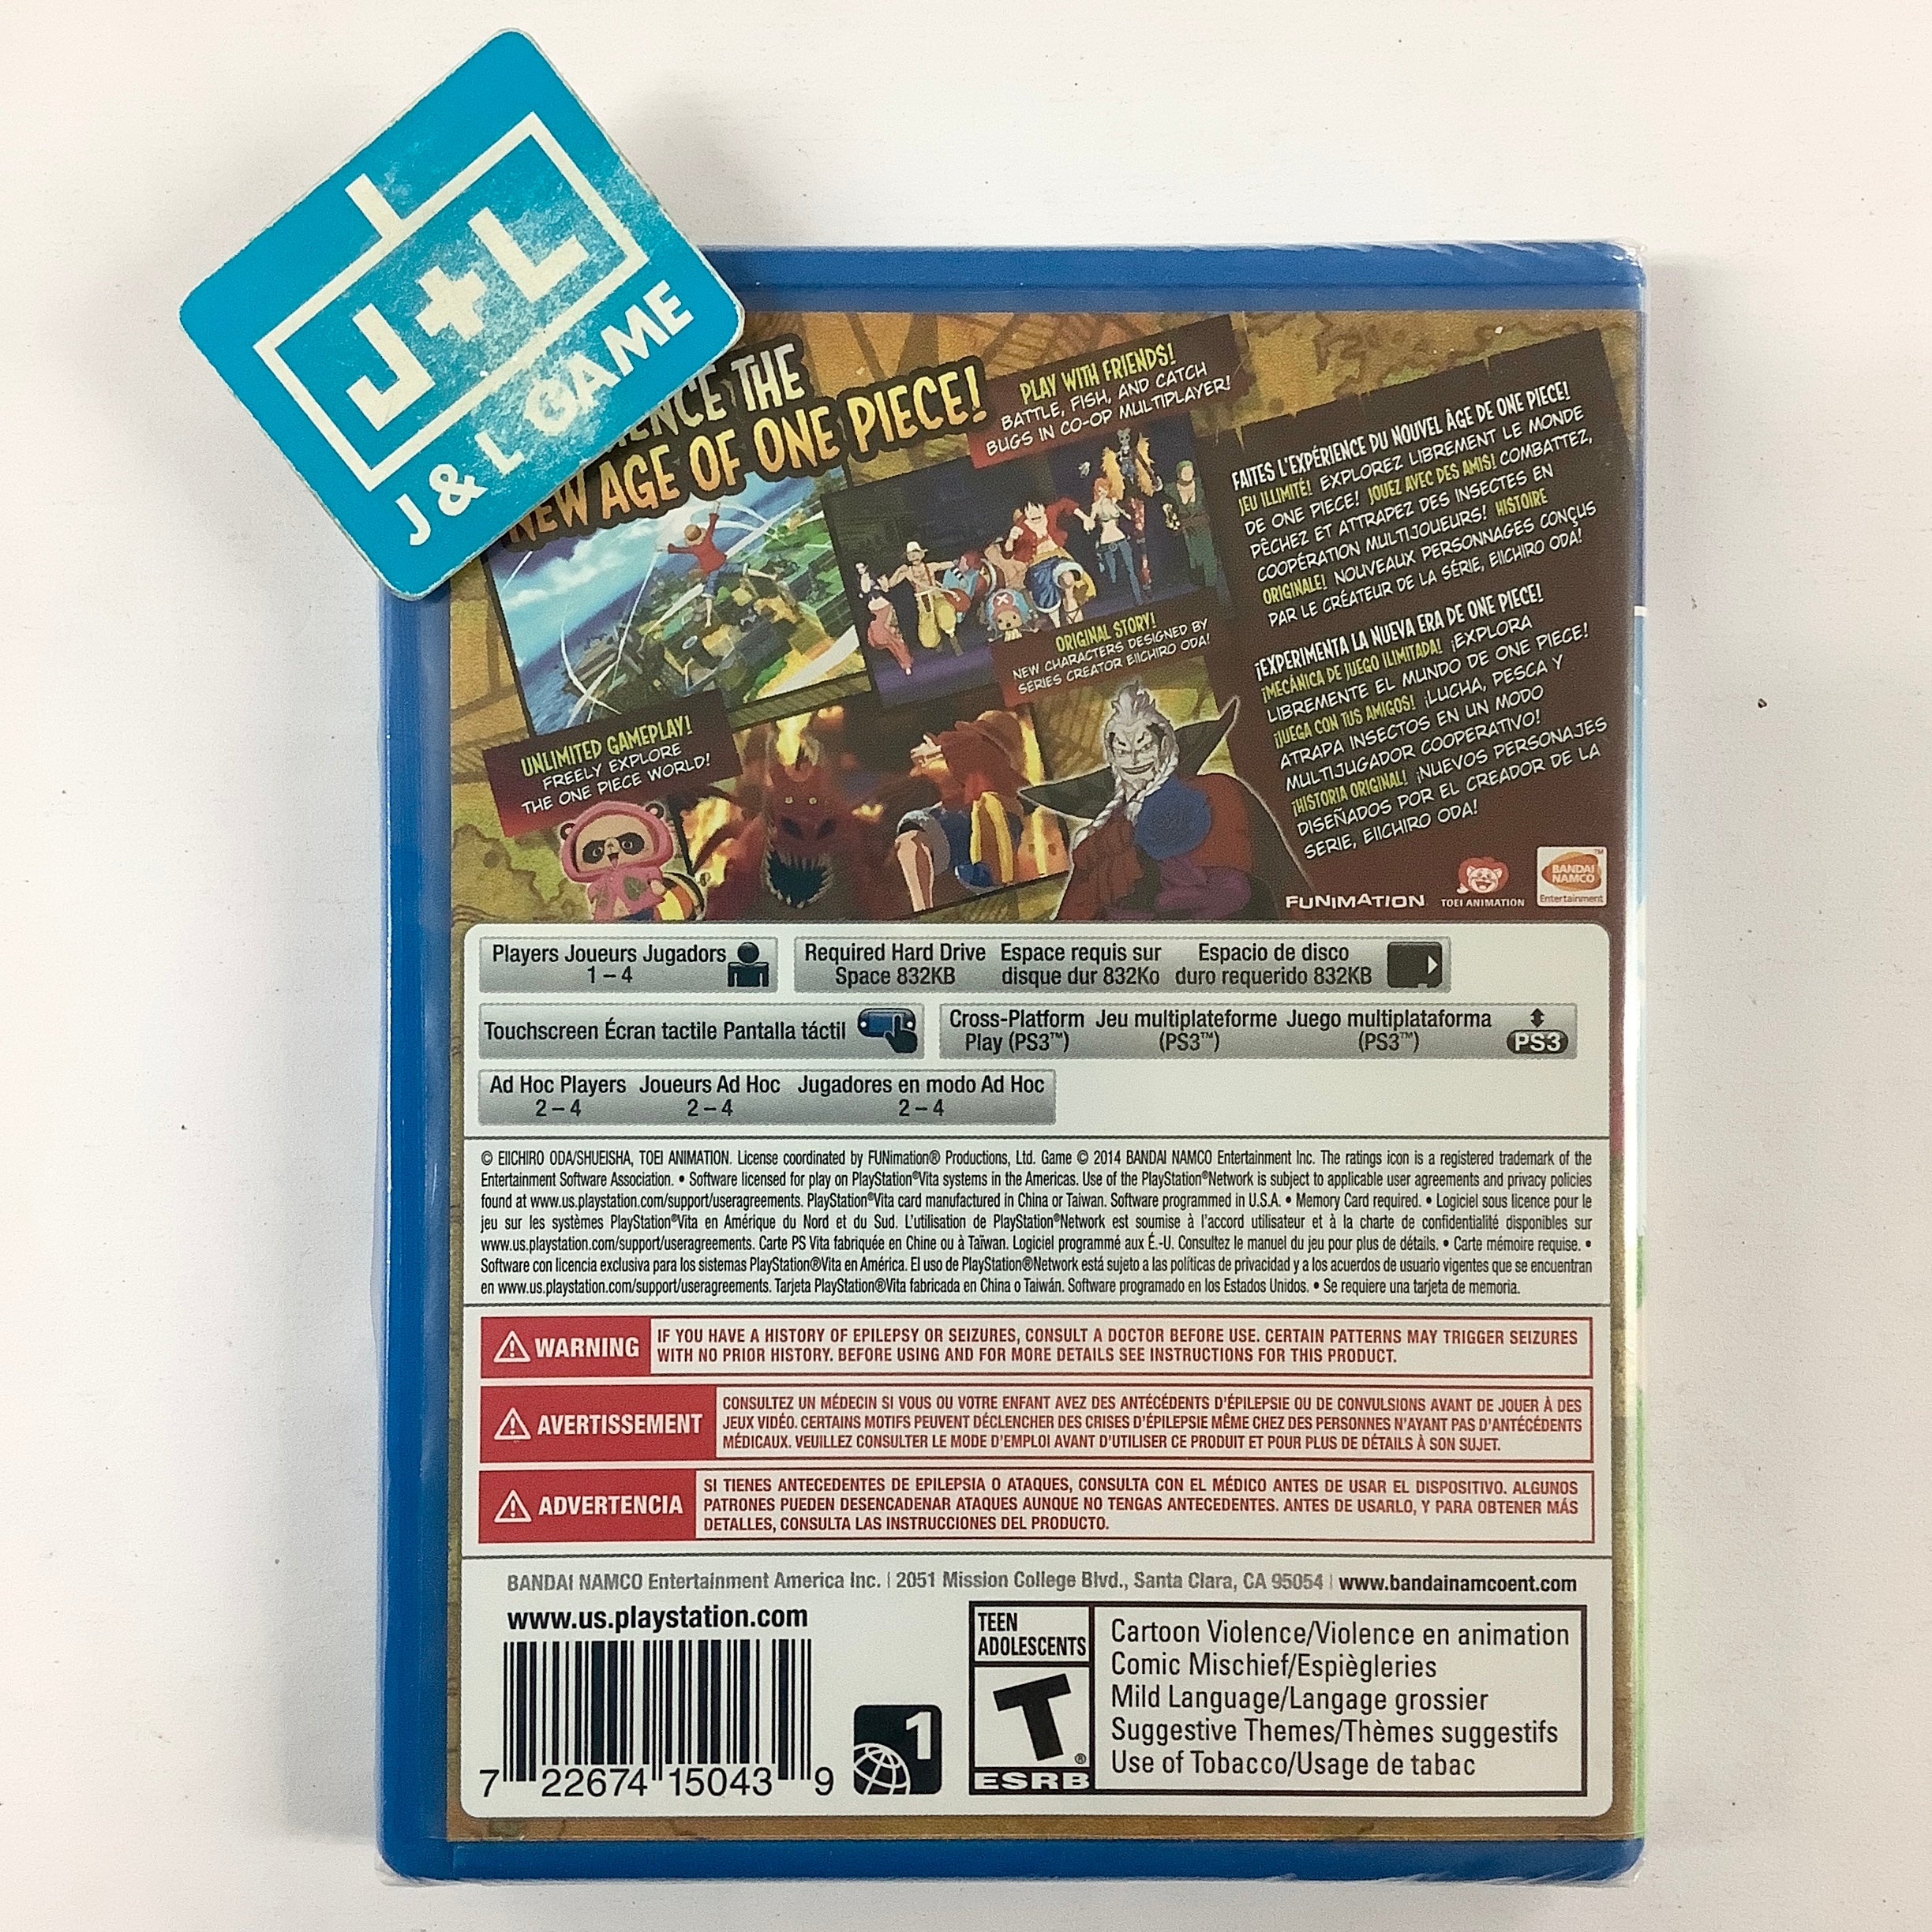 One Piece: Unlimited World Red - (PSV) PlayStation Vita Video Games Bandai Namco Games   